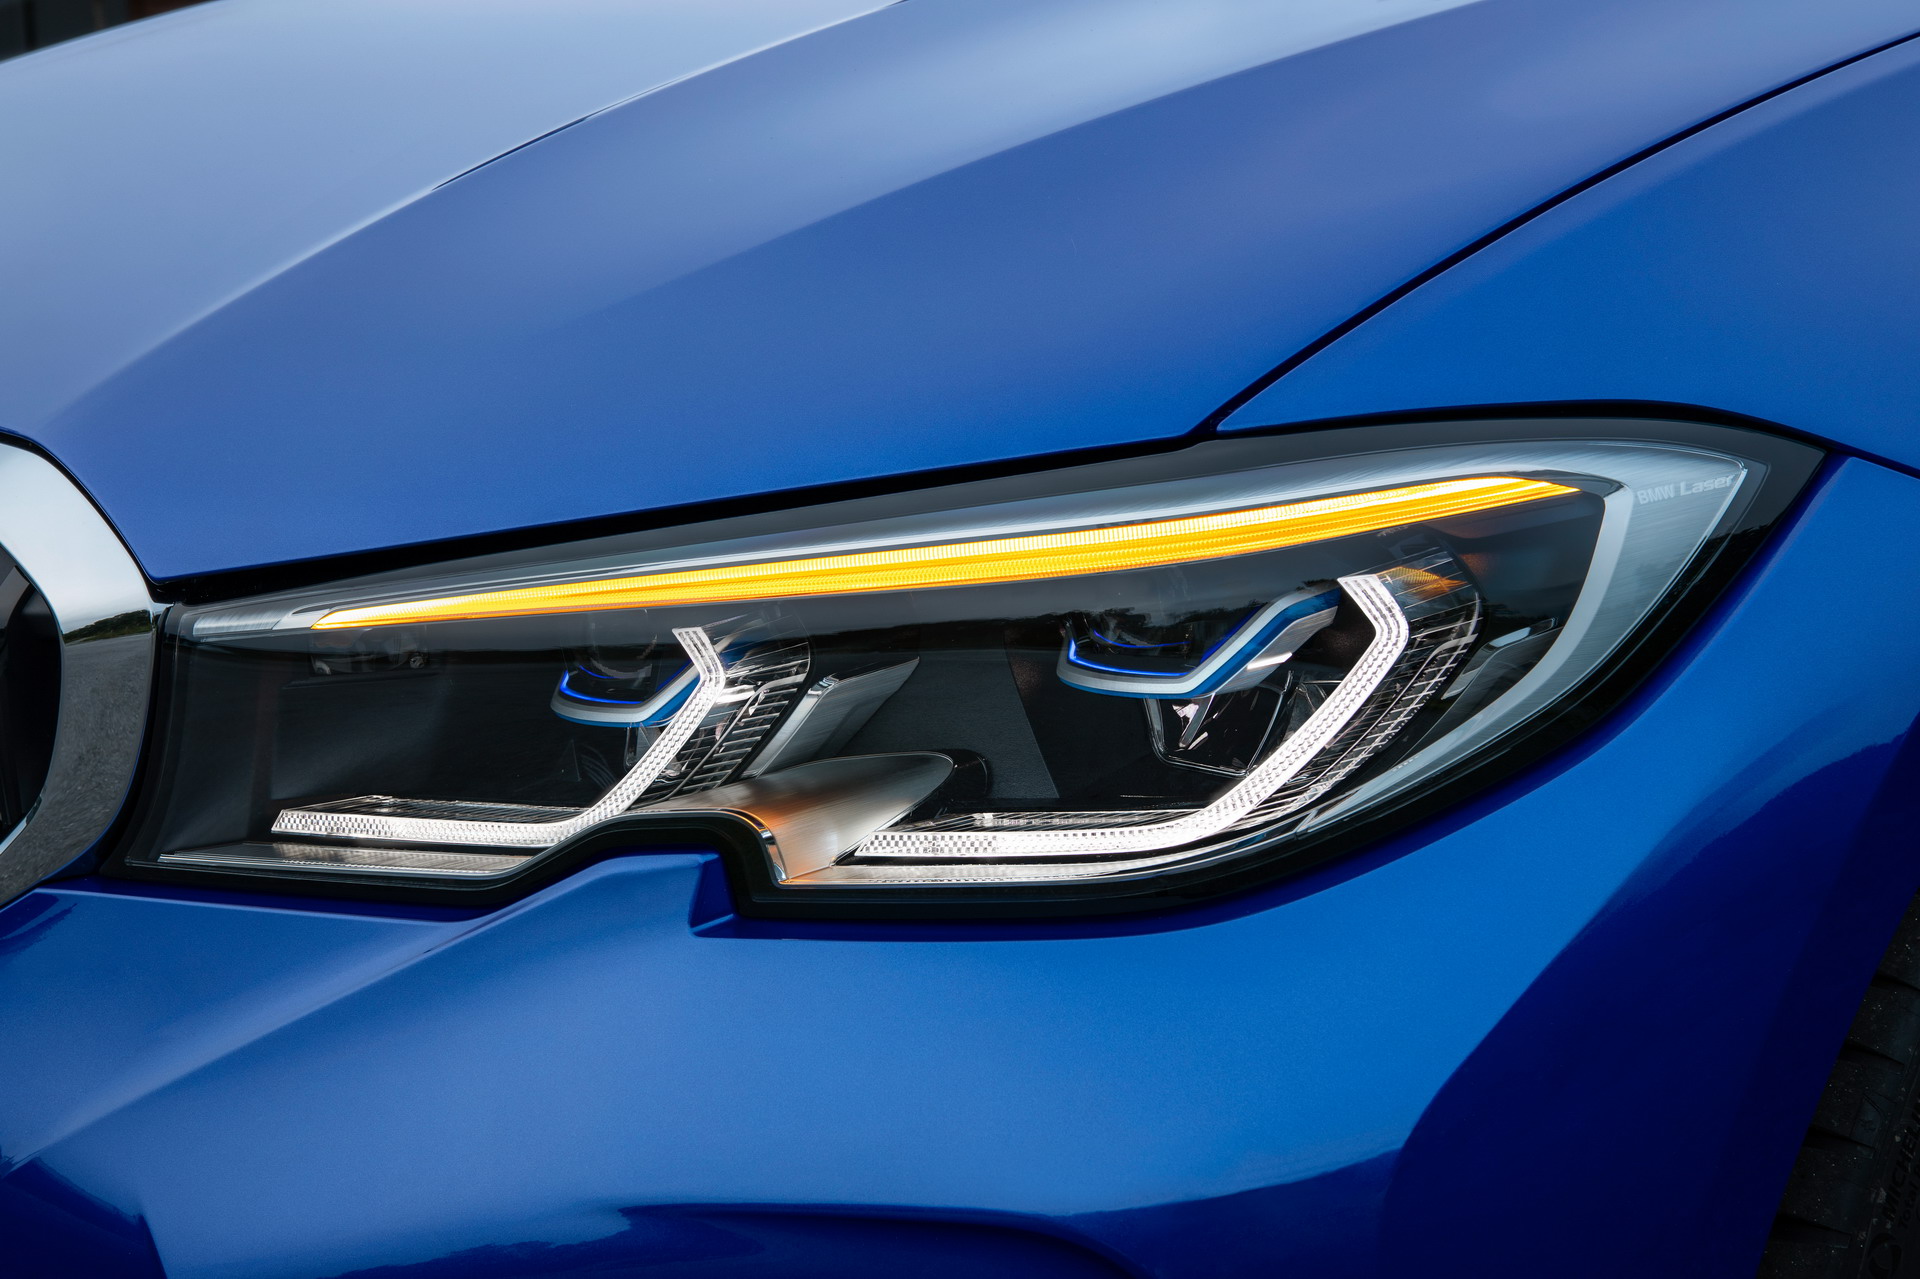 GUIDE: The Different BMW Headlights Technologies Explained